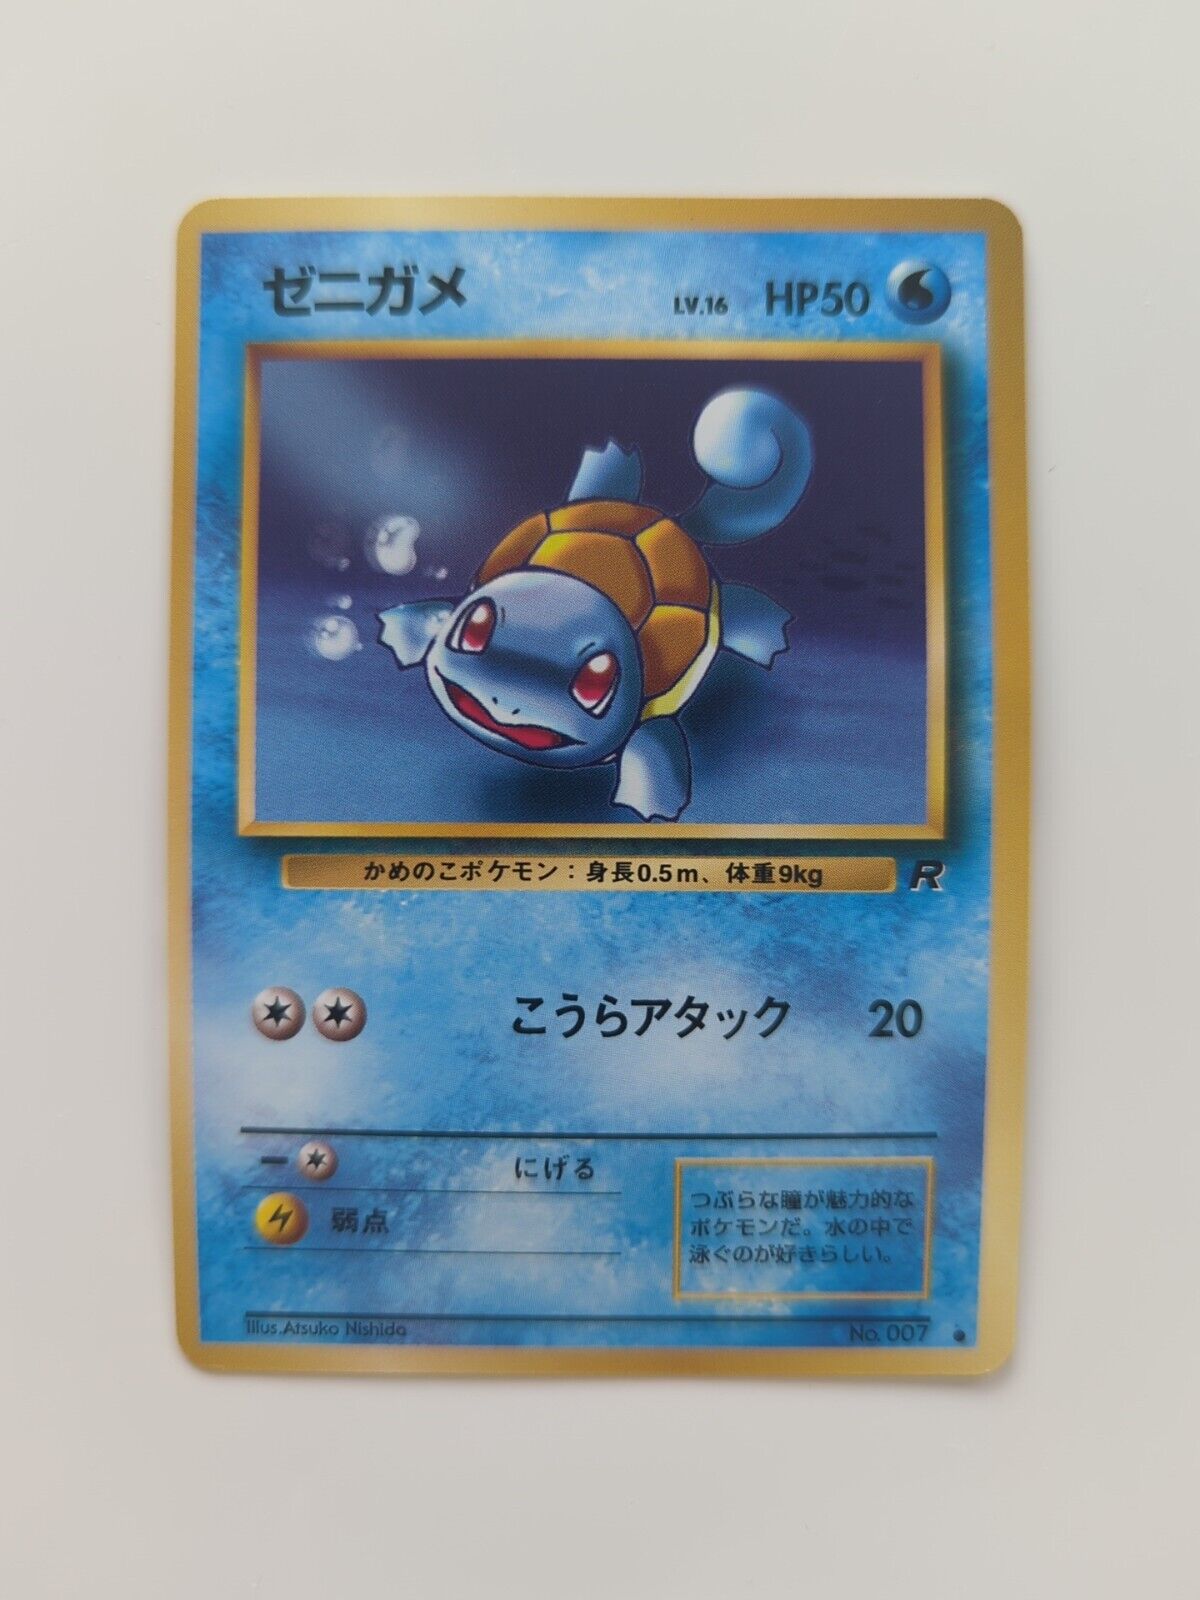 Pocket Monsters Squirtle - No. 007 - Japanese Card (Issued 1996)